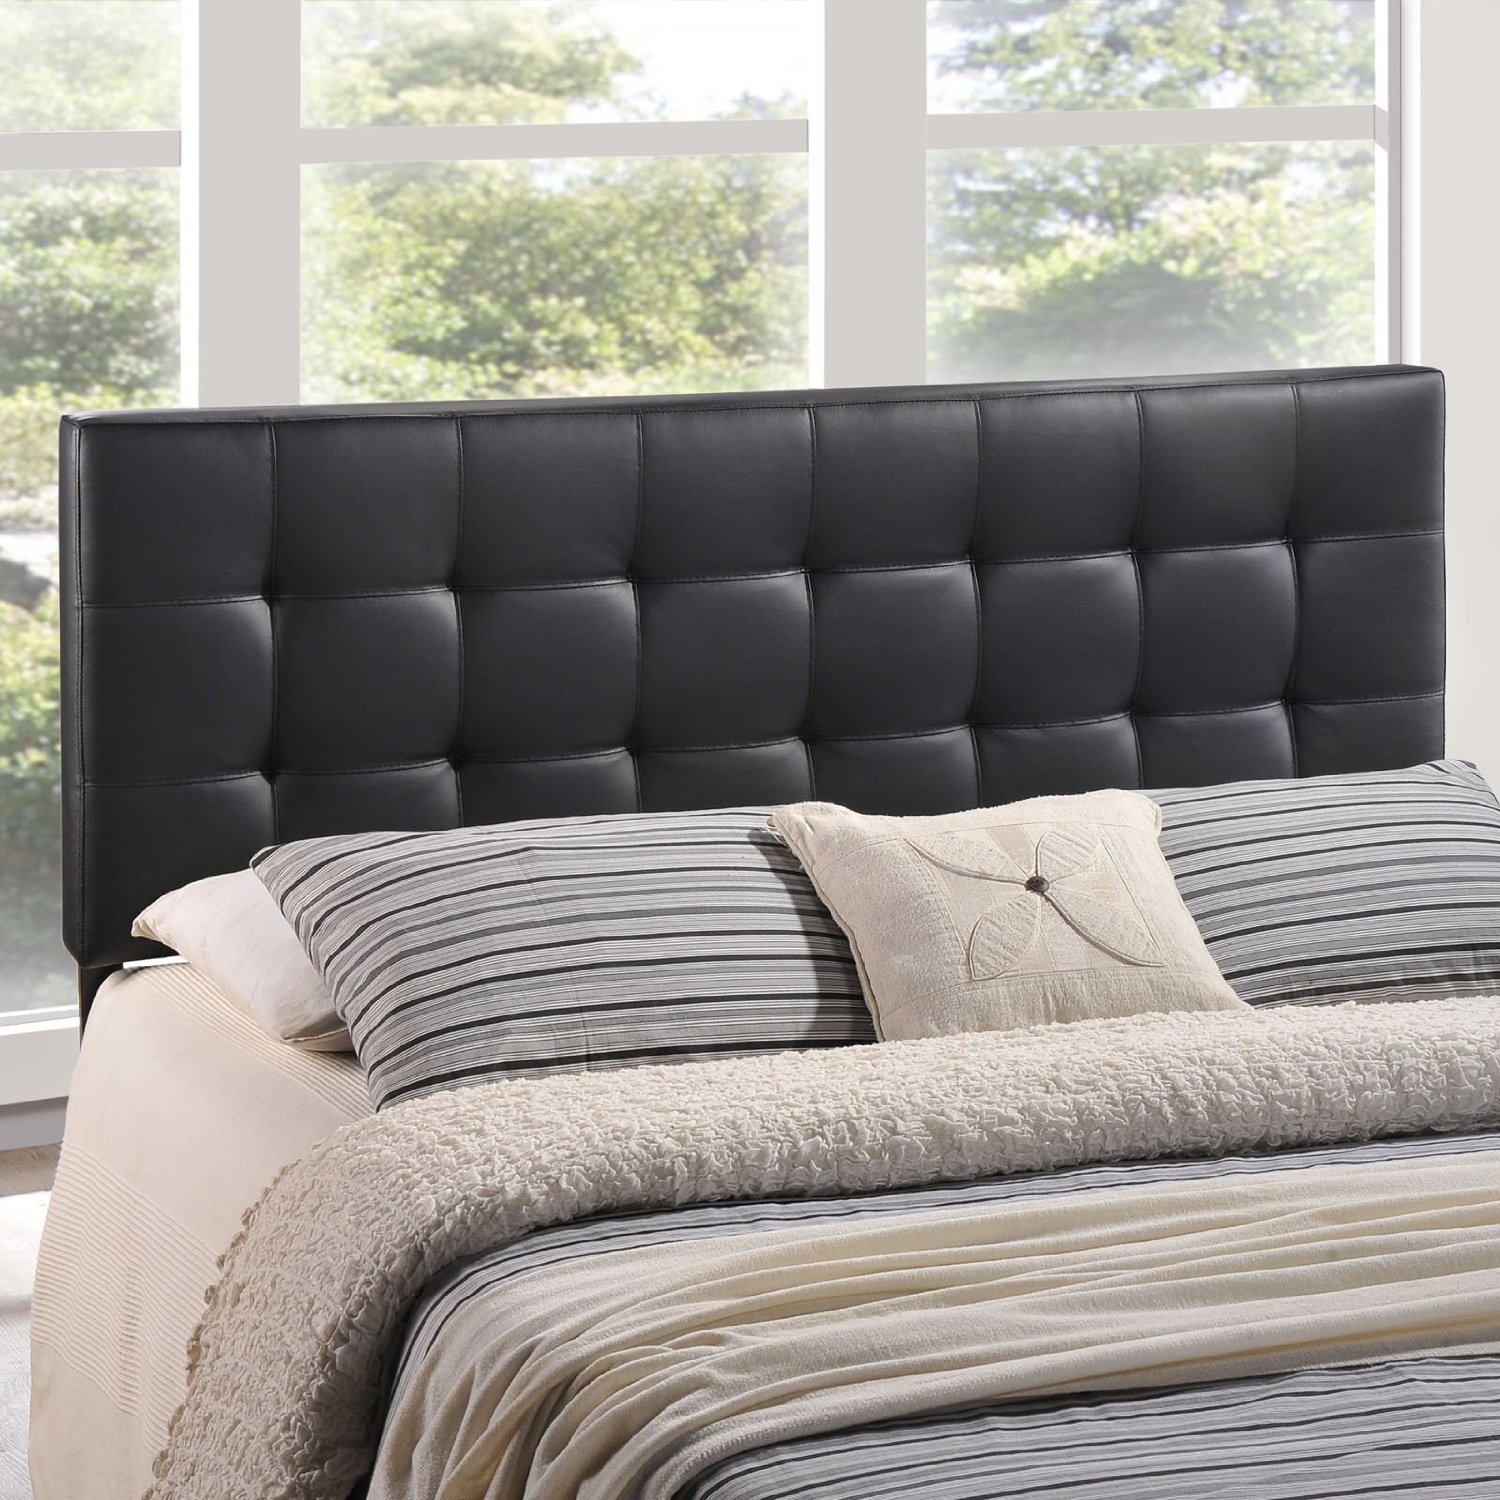 List 92+ Background Images Pictures Of Headboards For Beds Excellent